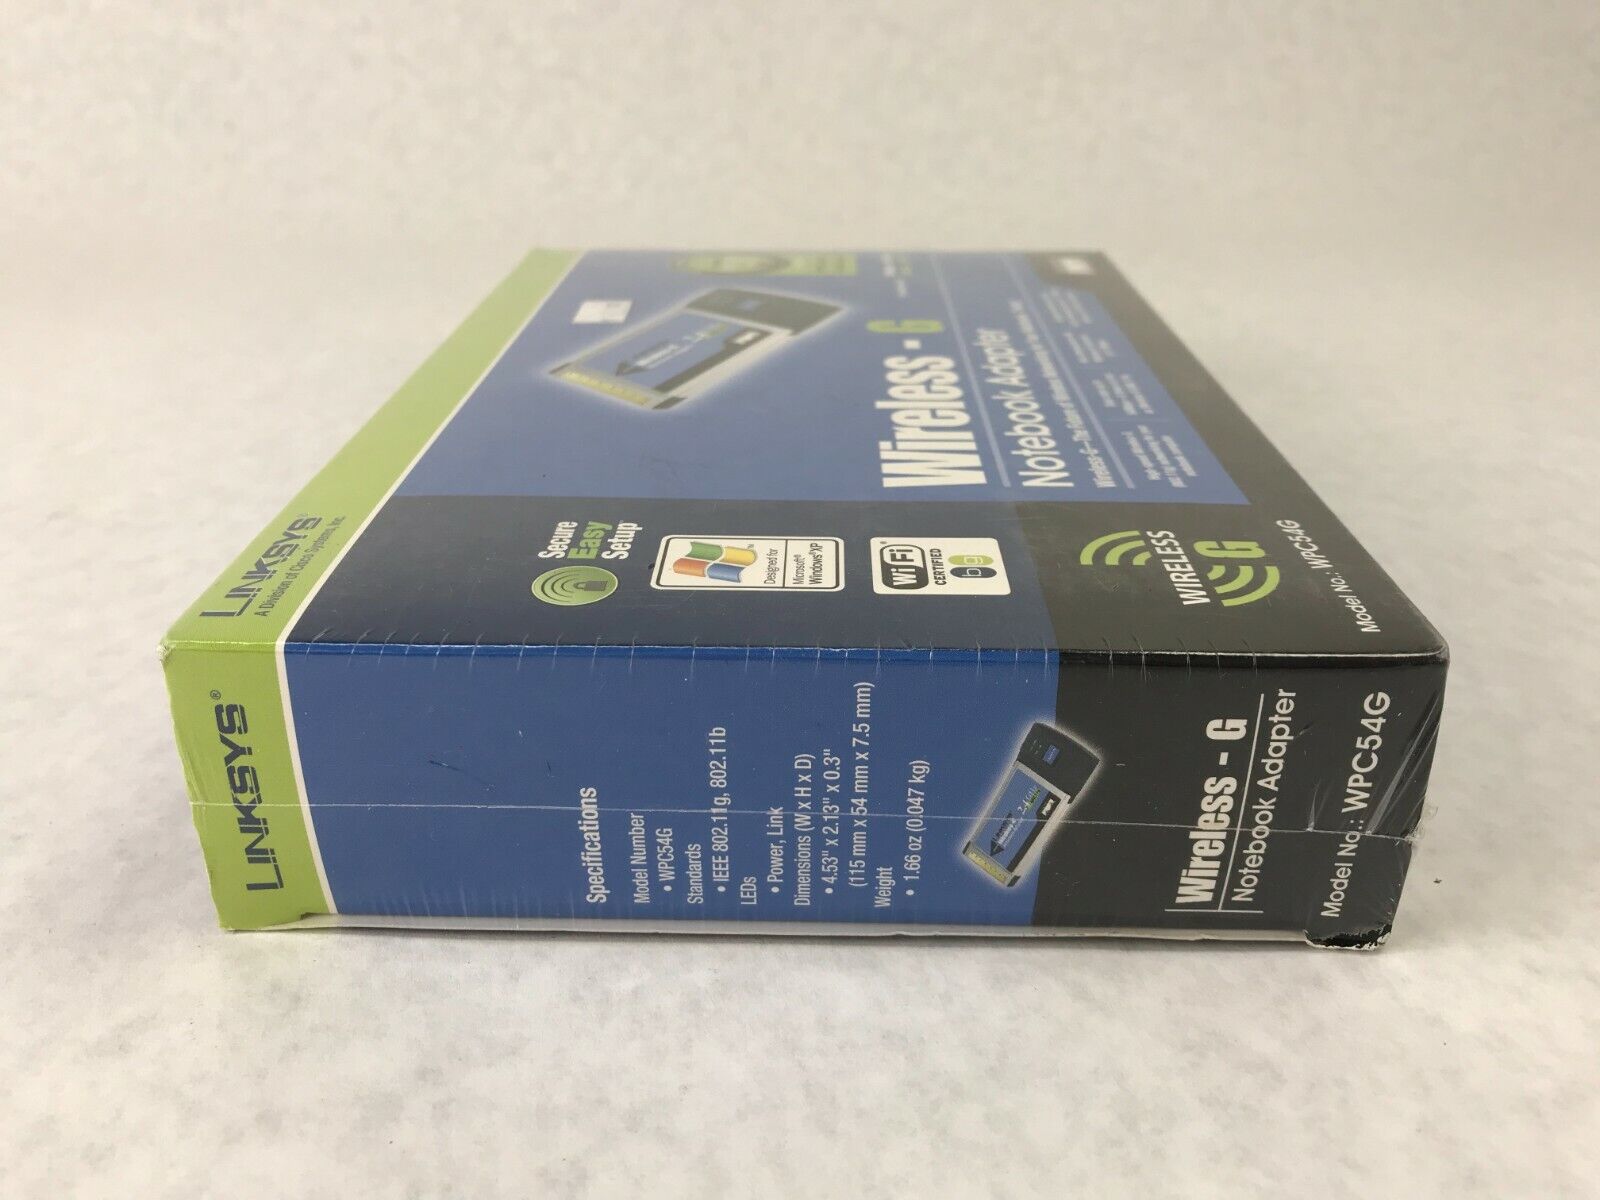 Lot of 2 Linksys Wireless G Notebook Adapter Cisco Systems WPC54G Factory Sealed